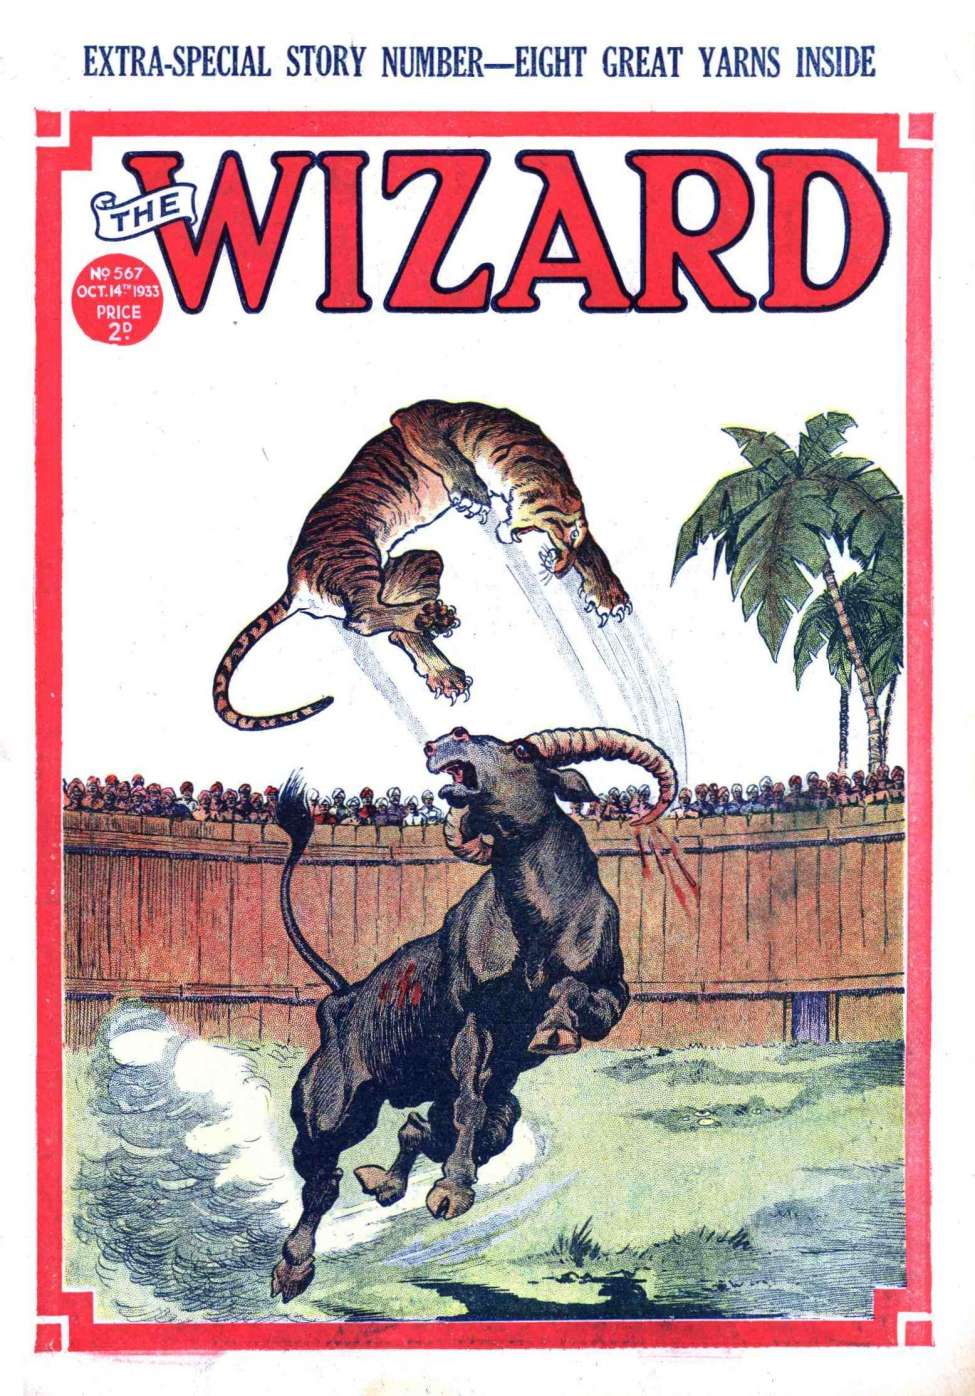 Book Cover For The Wizard 567